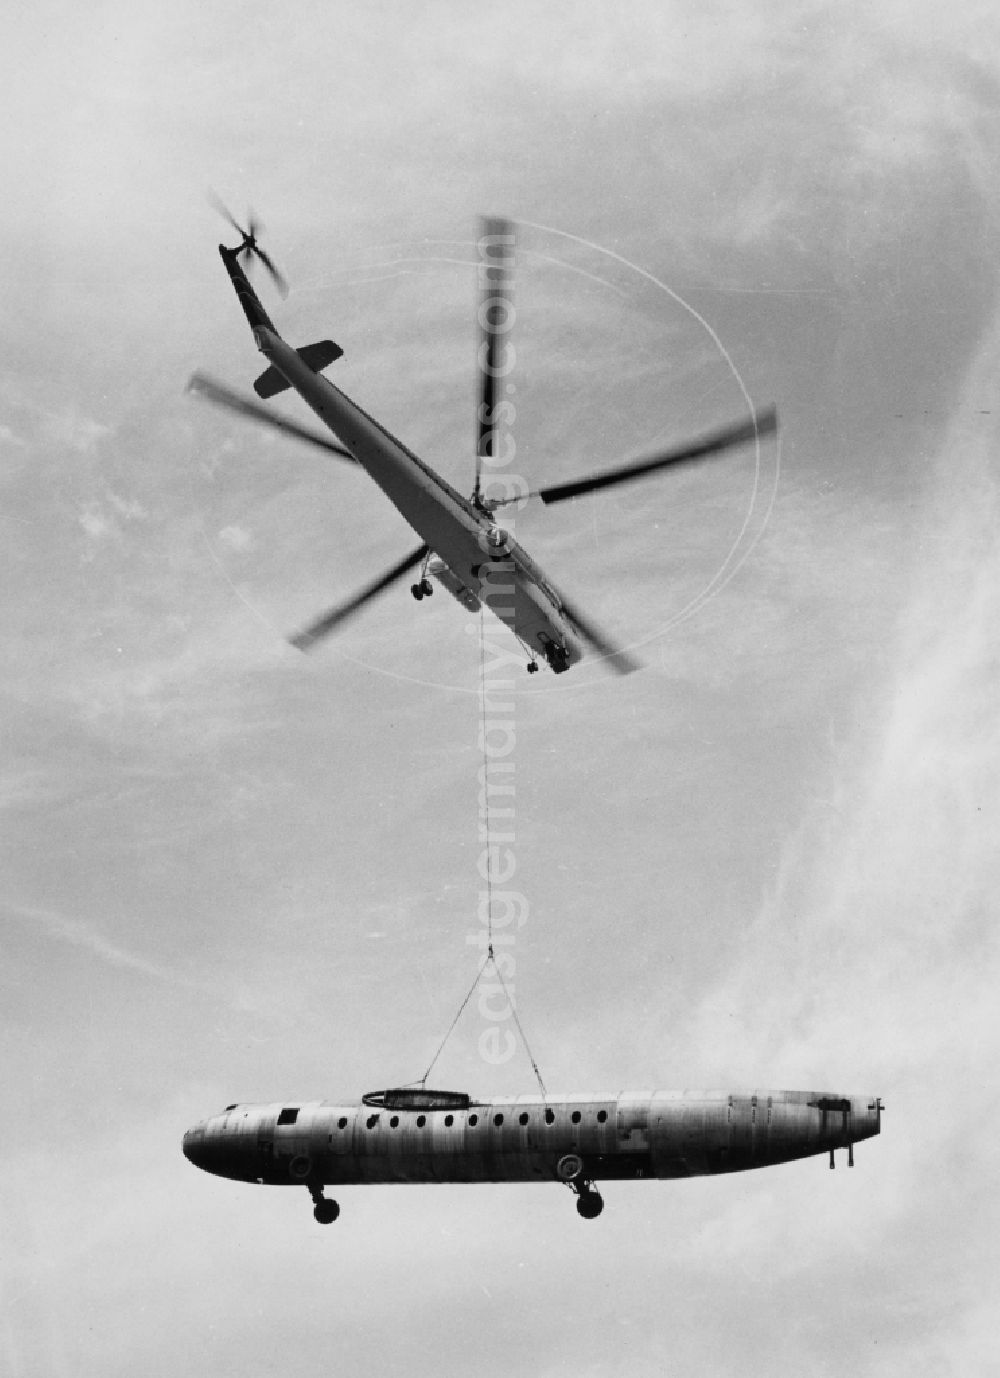 GDR picture archive: Dresden - Ferry flight of an aircraft fuselage 152 of the aircraft production in the GDR VEB Flugzeugwerke Dresden (FWD) with a Soviet Mil Mi-1